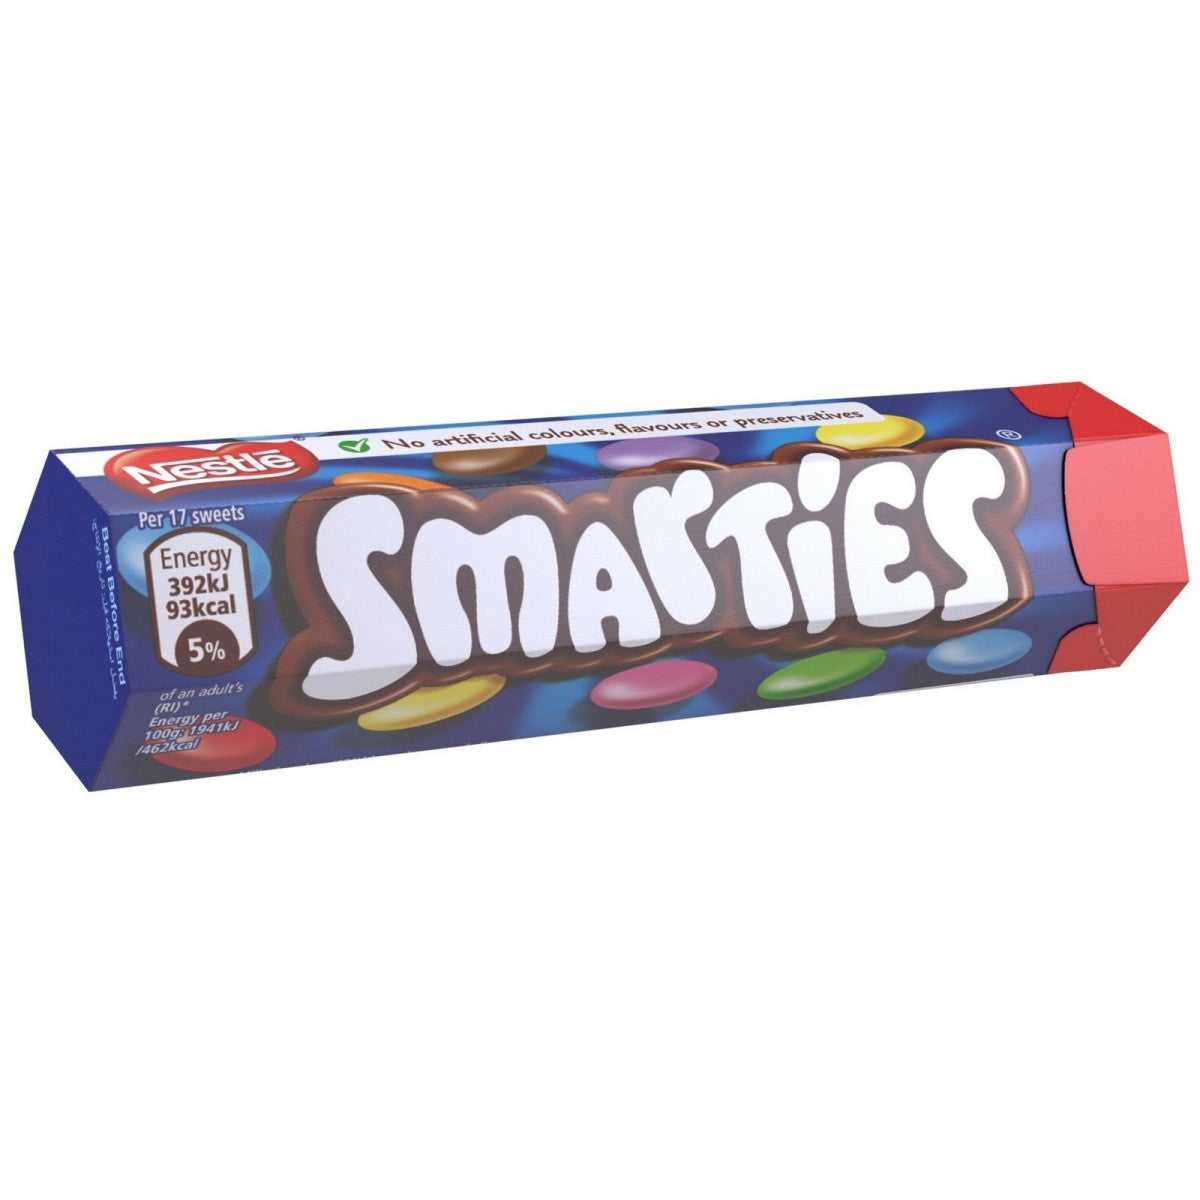 Nestle Smarties, 38g (Product of the United Kingdom)